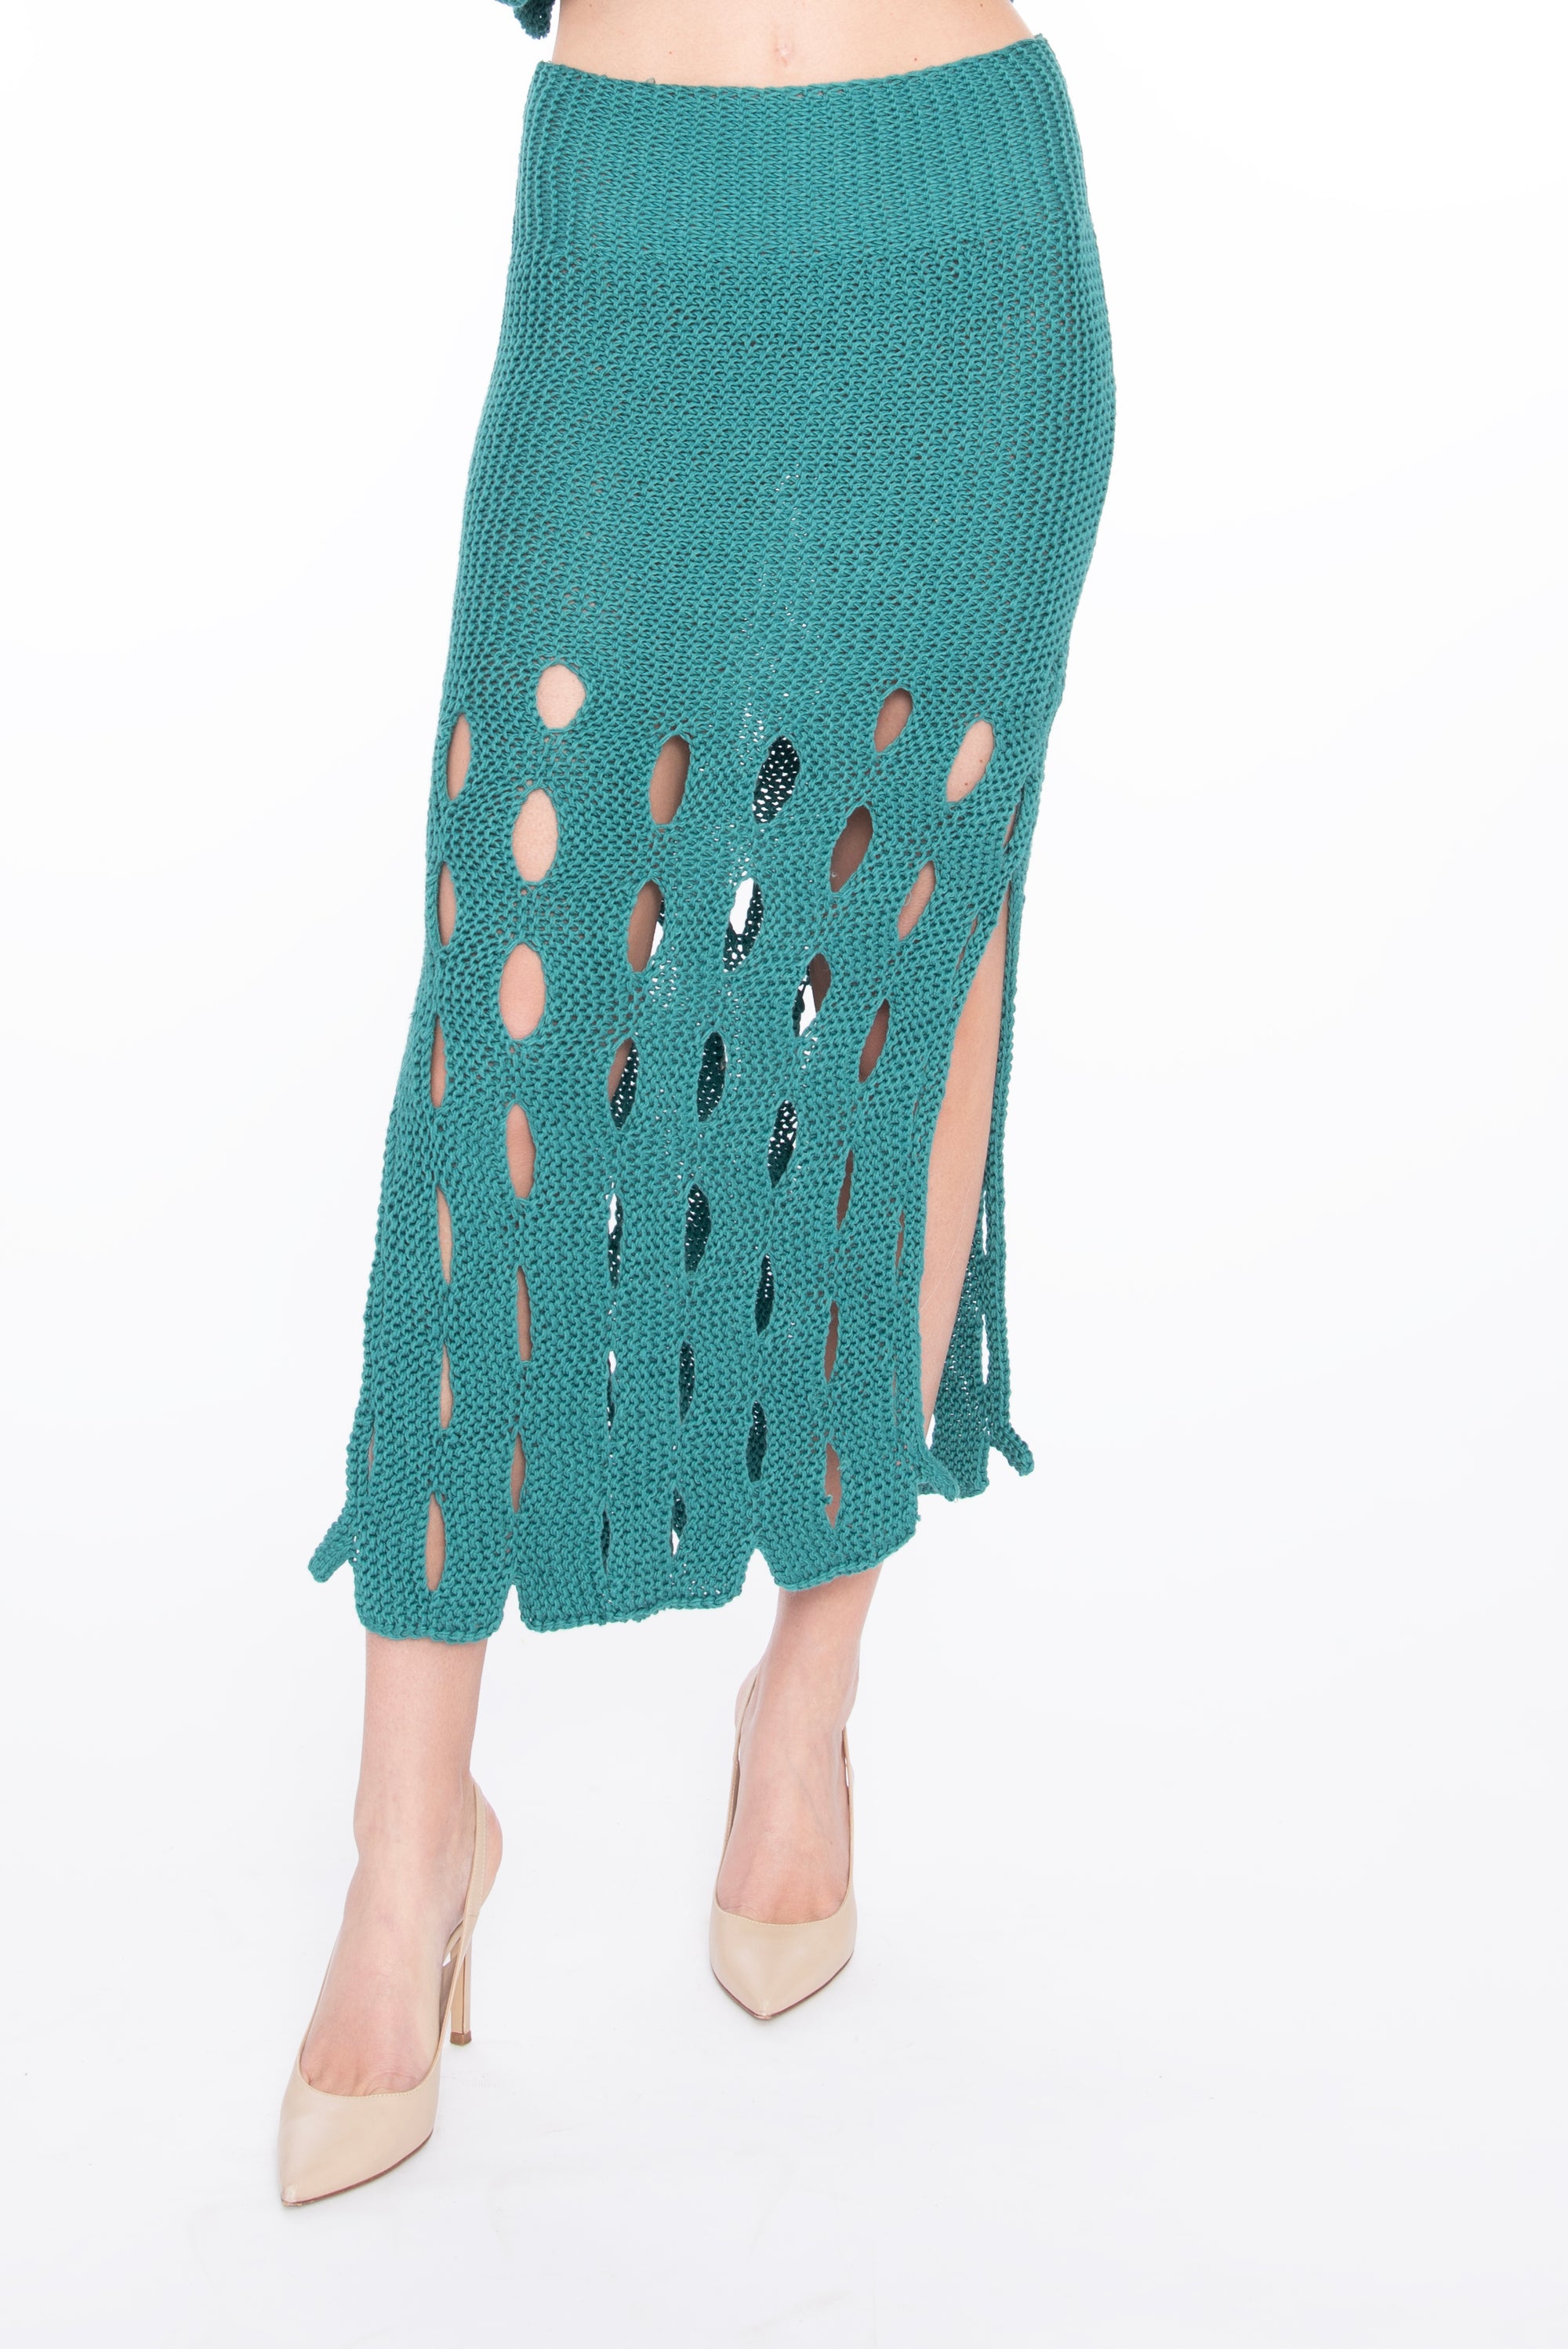 Handmade perforated cotton sweater